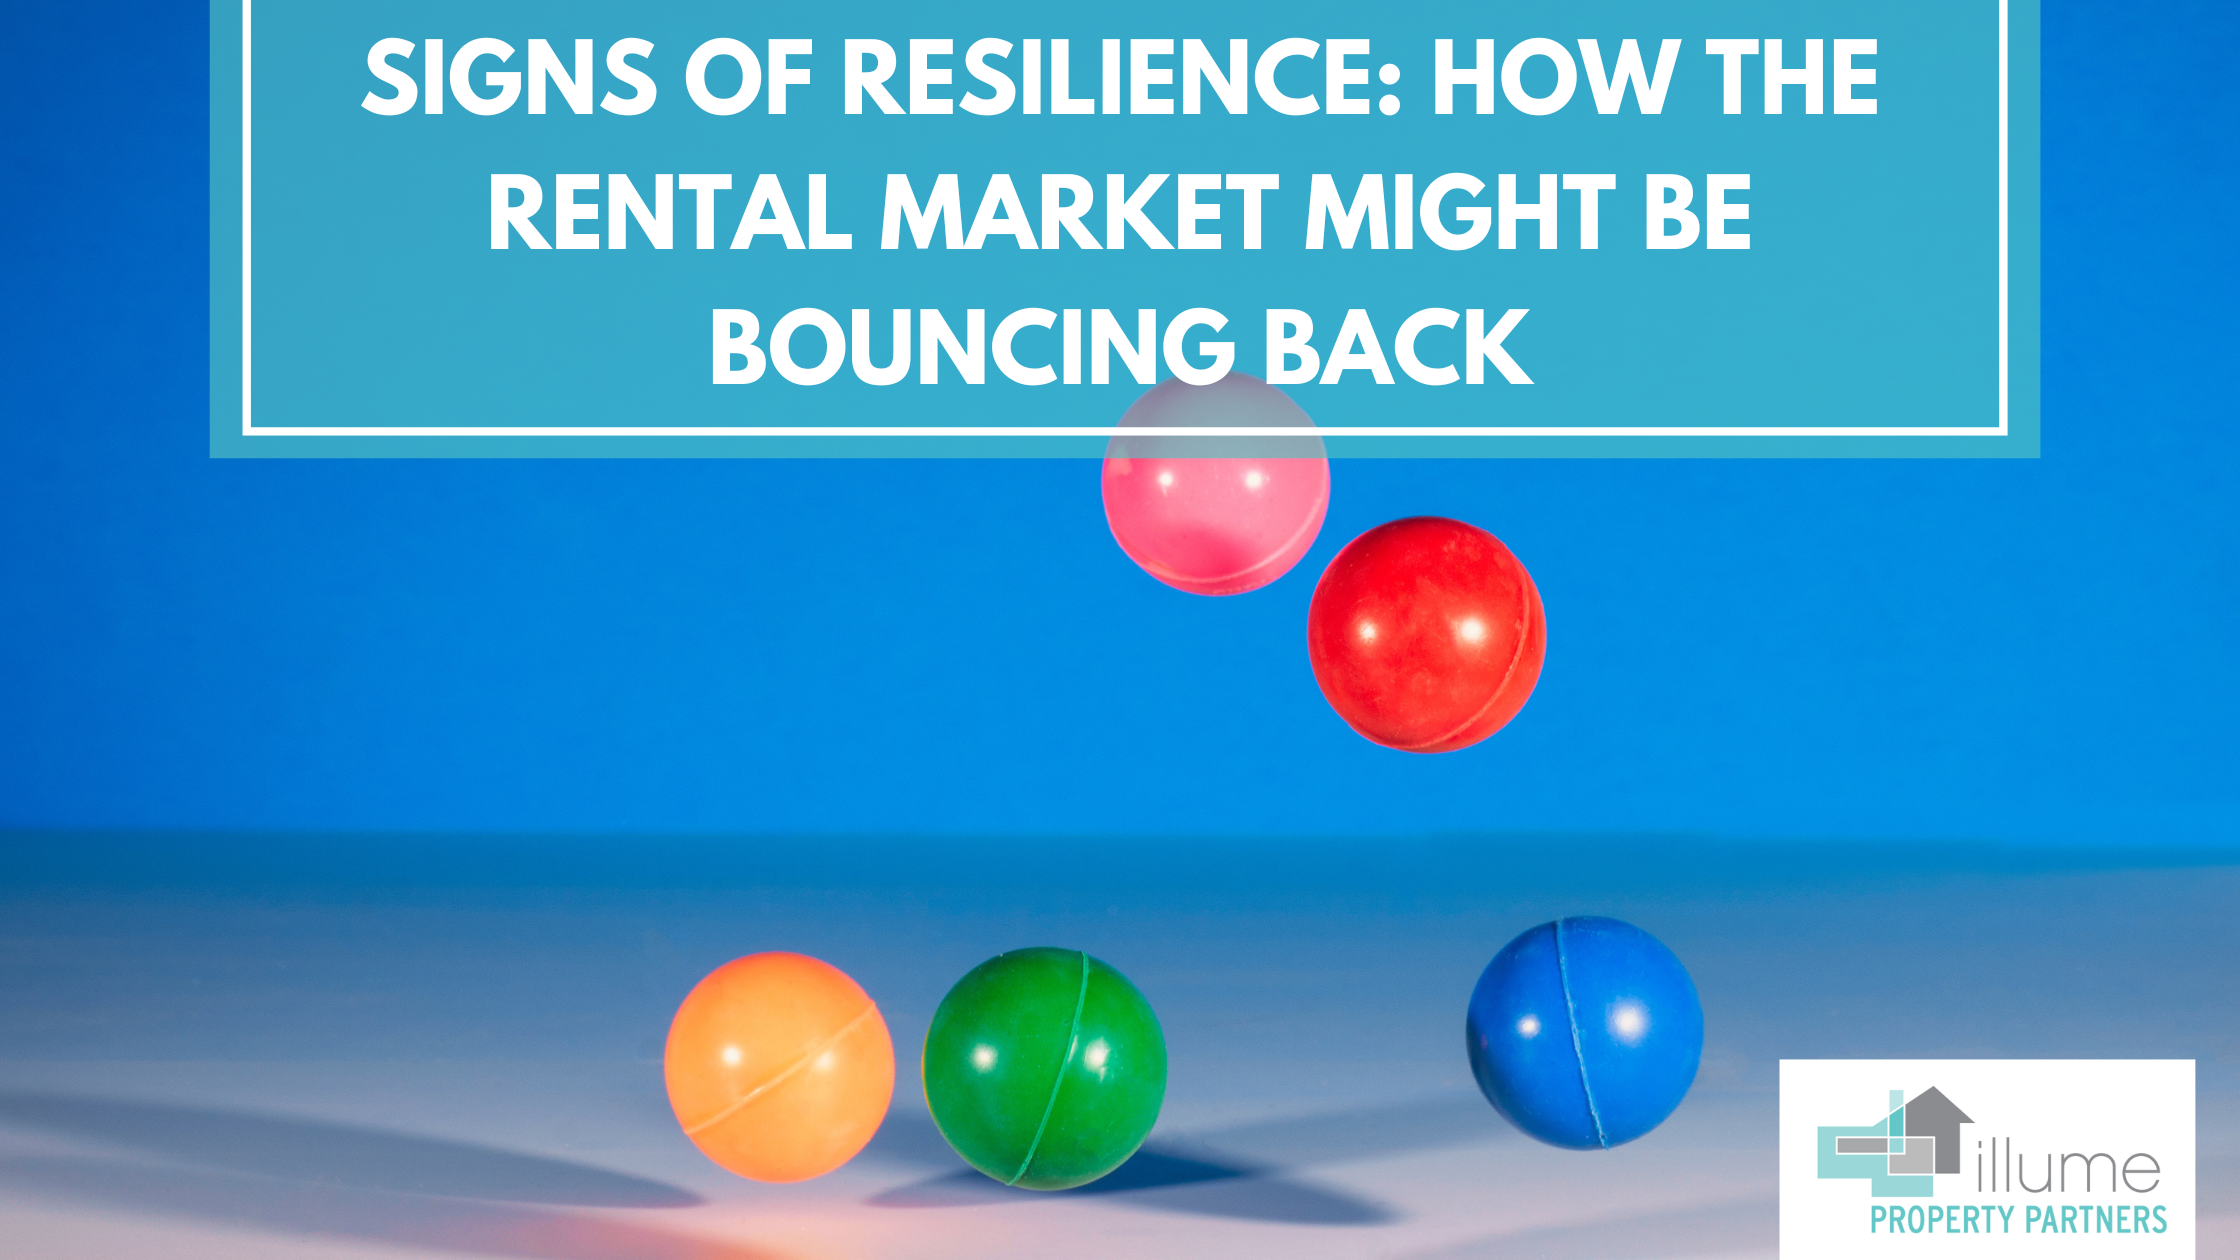 Signs of Resilience: How the rental market might be bouncing back